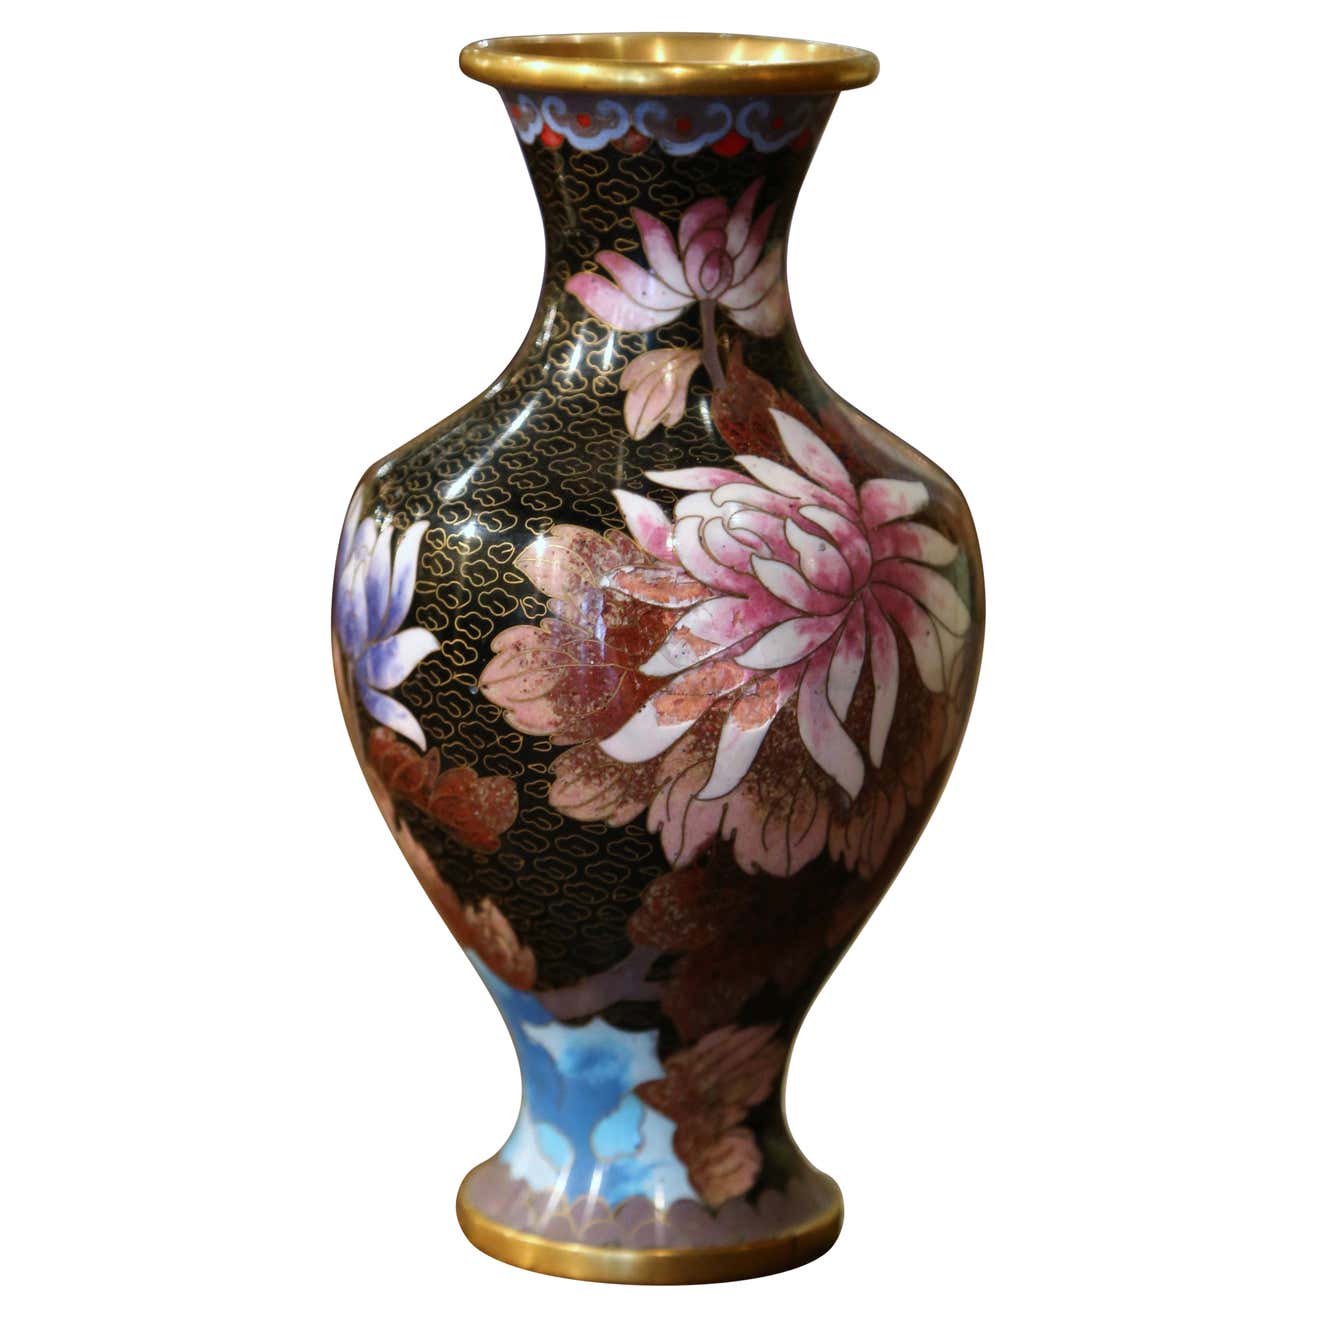 Vintage Chinese Cloisonne Enamel Vase with and Leaf Motifs Country French